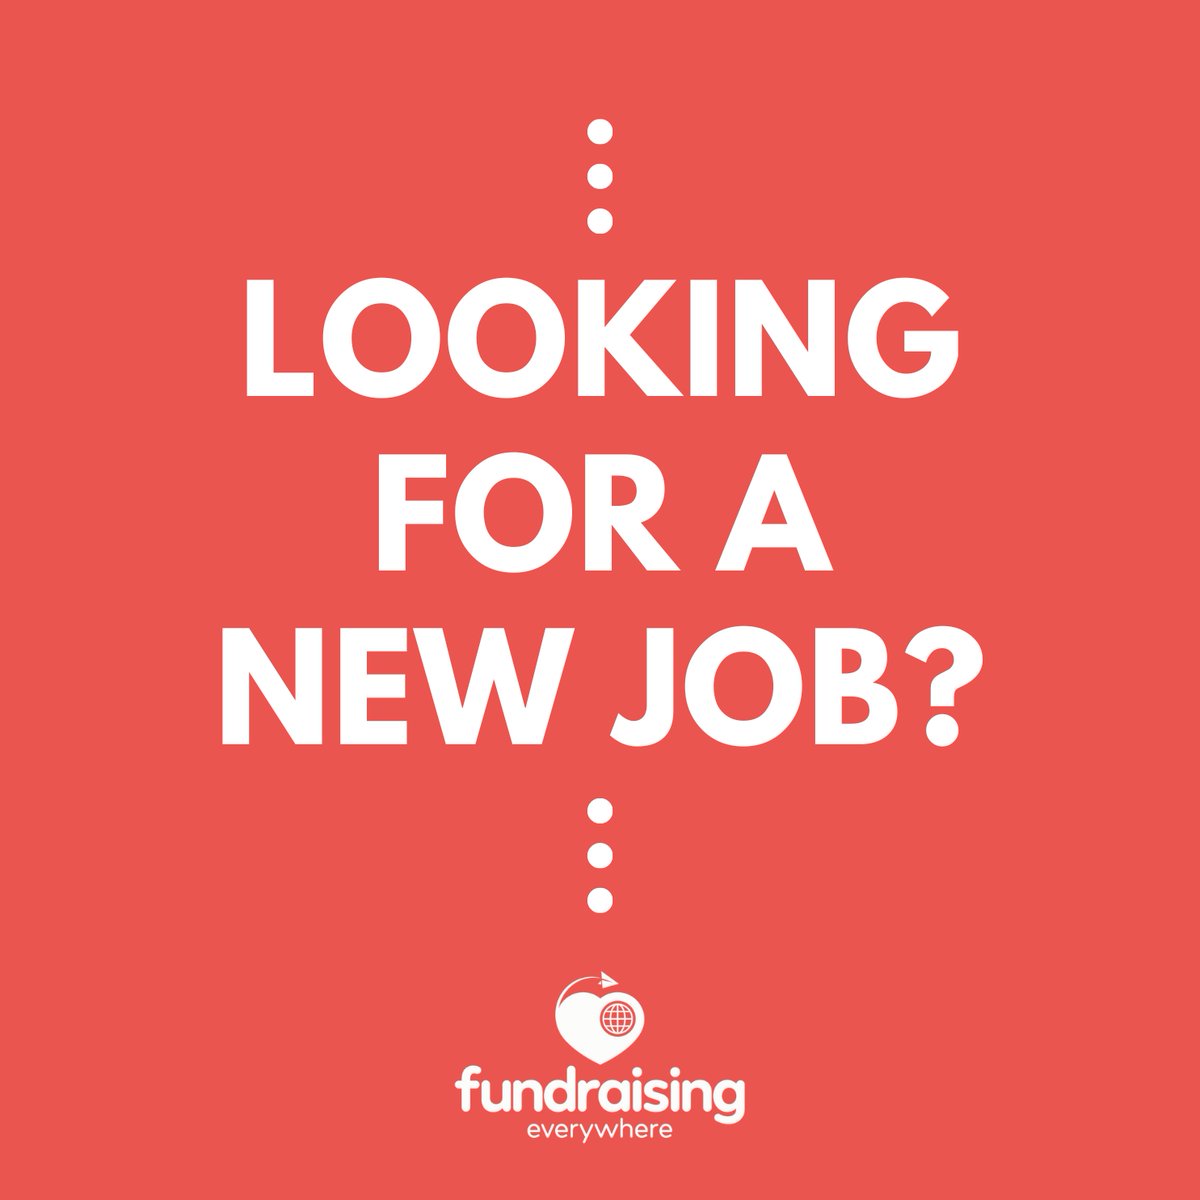 Your weekly jobs thread. Please add below 👇 ⚠️ We will delete any roles shared that ask for a degree/unnecessary qualifications or don't show the salary, so please don't include ⚠️ #newjob #jobsearch #fundraisingjobs #jobs #thirdsectorjobs